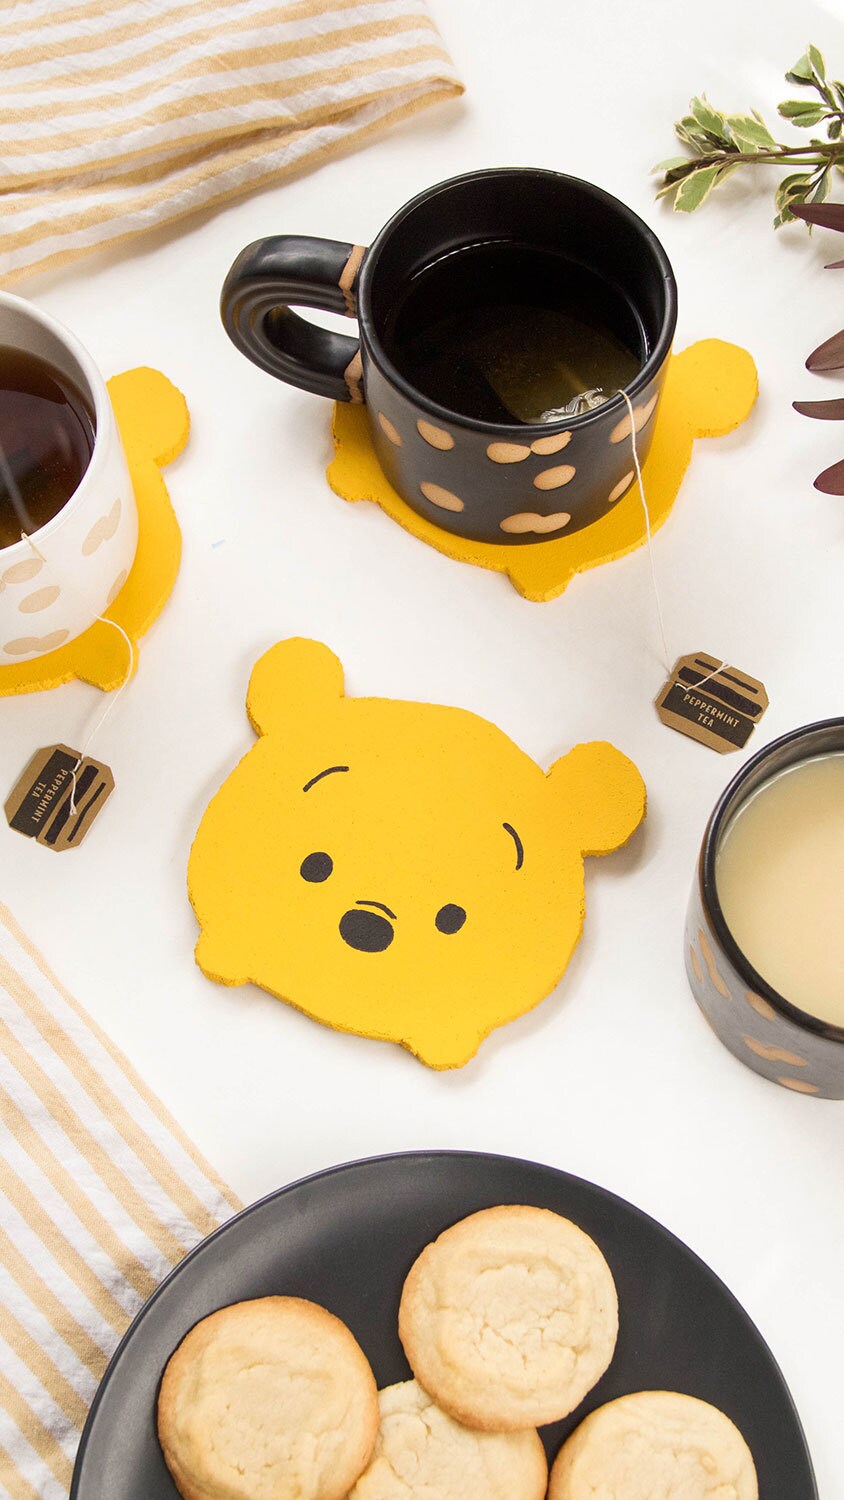 A yellow Winnie the Pooh drink coaster.